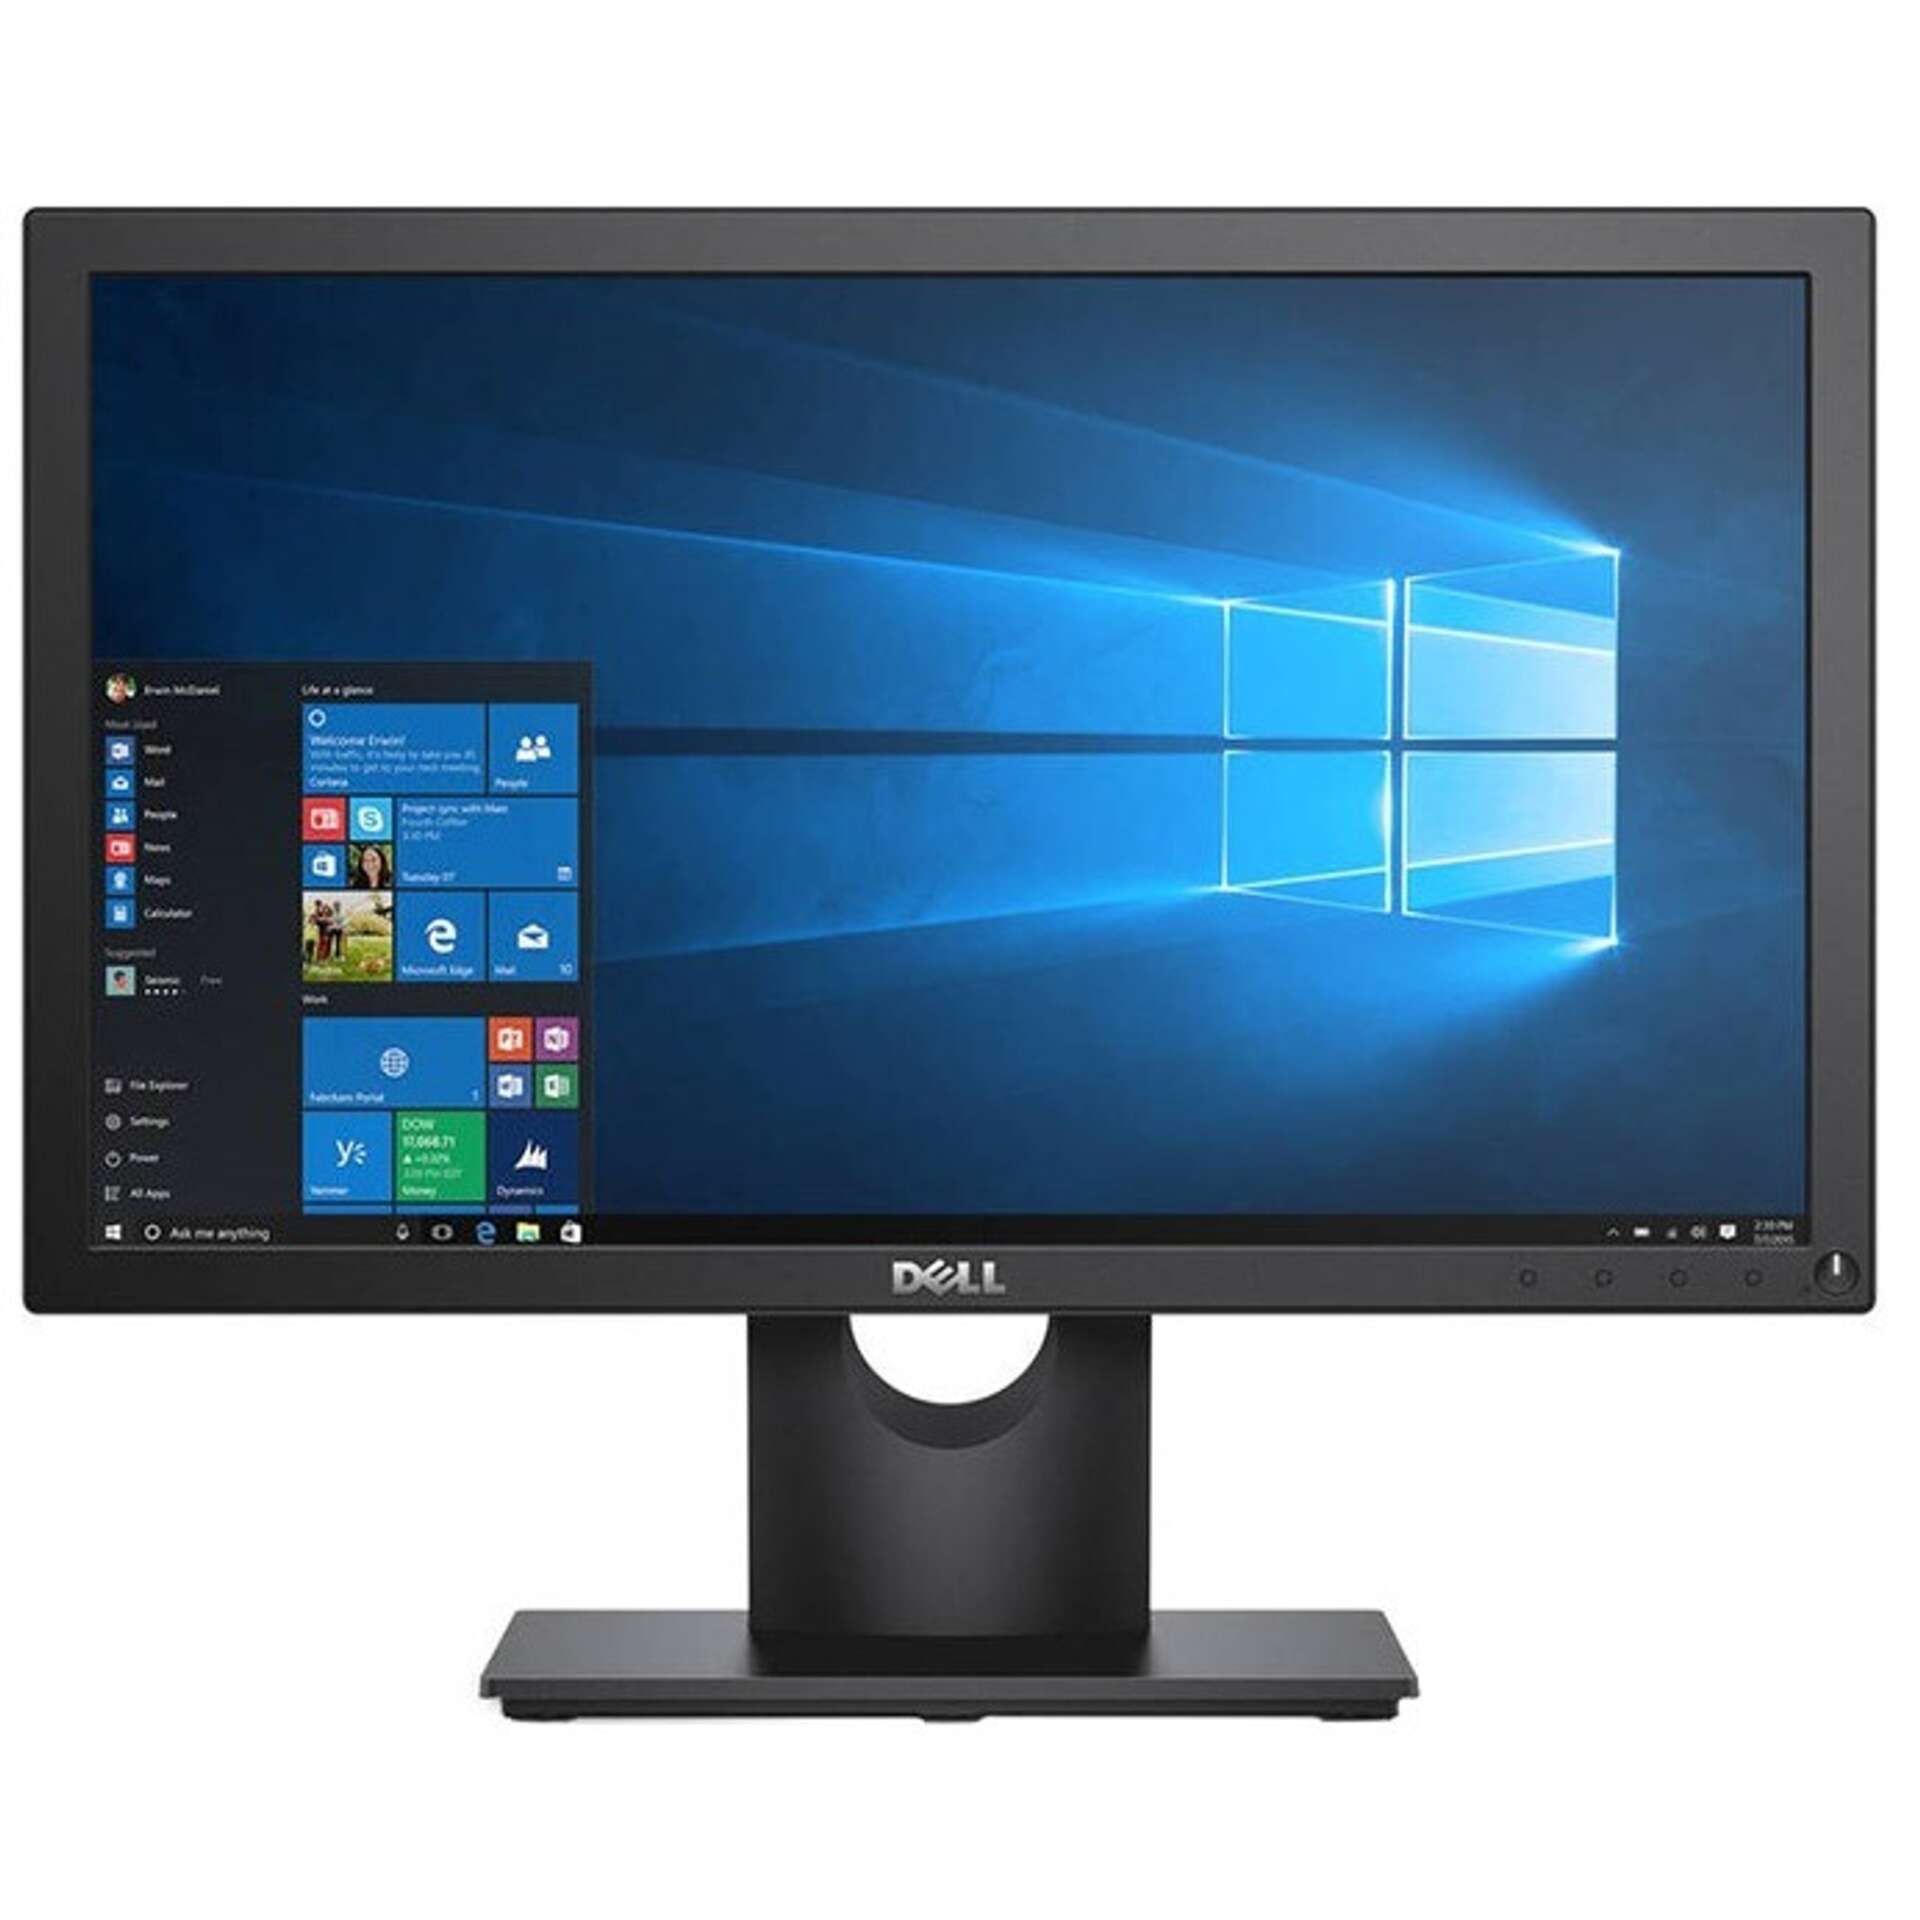 Dell 210-afqp monitor 18.5inch 1366x768 tn 60hz 5ms fekete